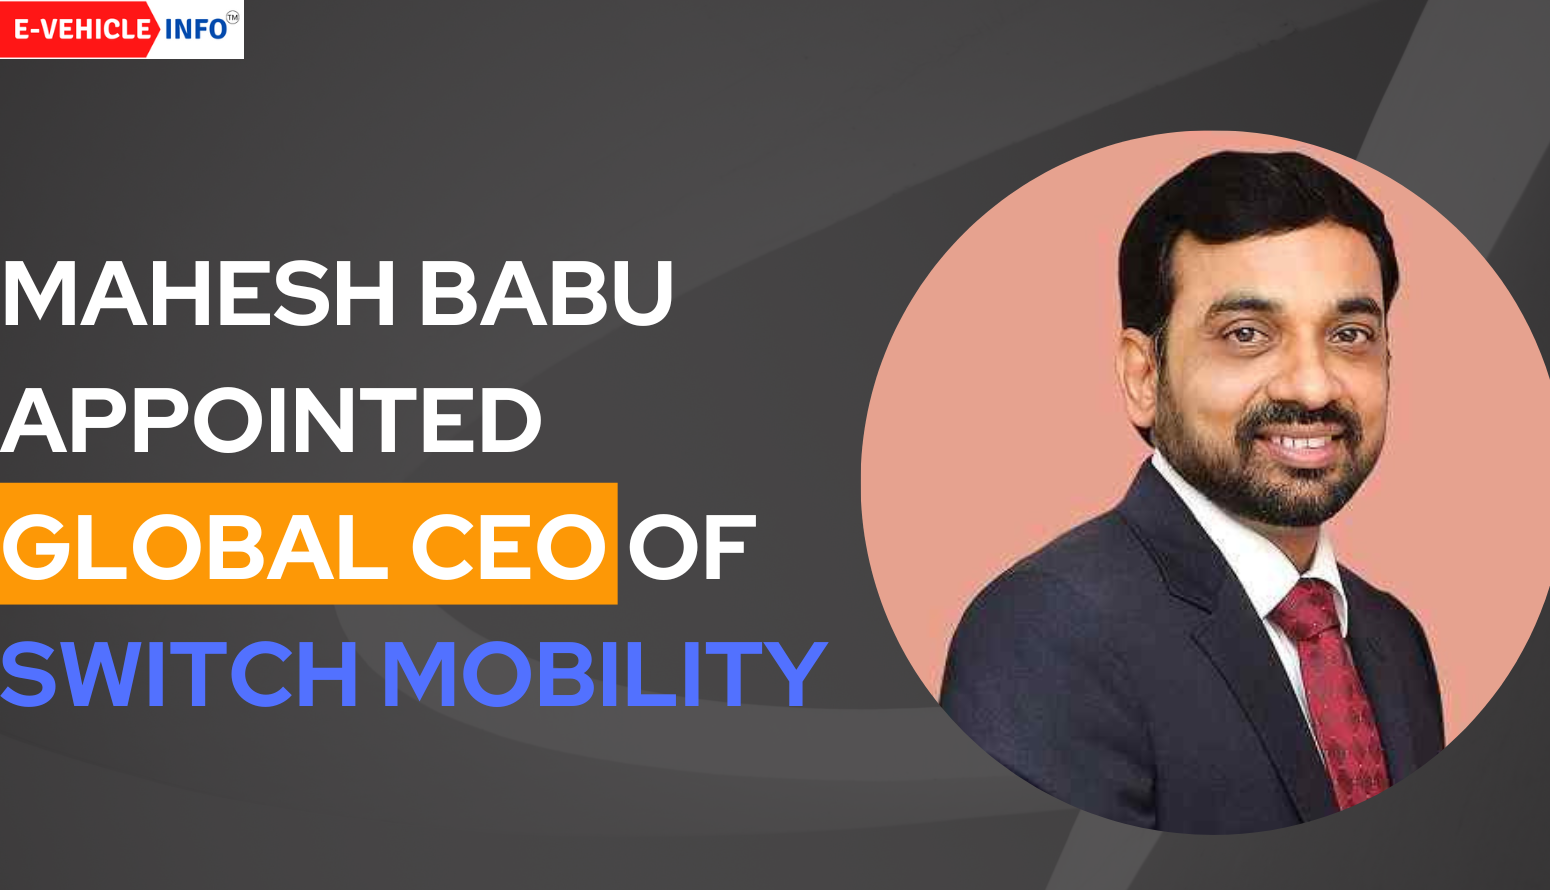 https://e-vehicleinfo.com/mahesh-babu-appointed-global-ceo-of-switch-mobility/